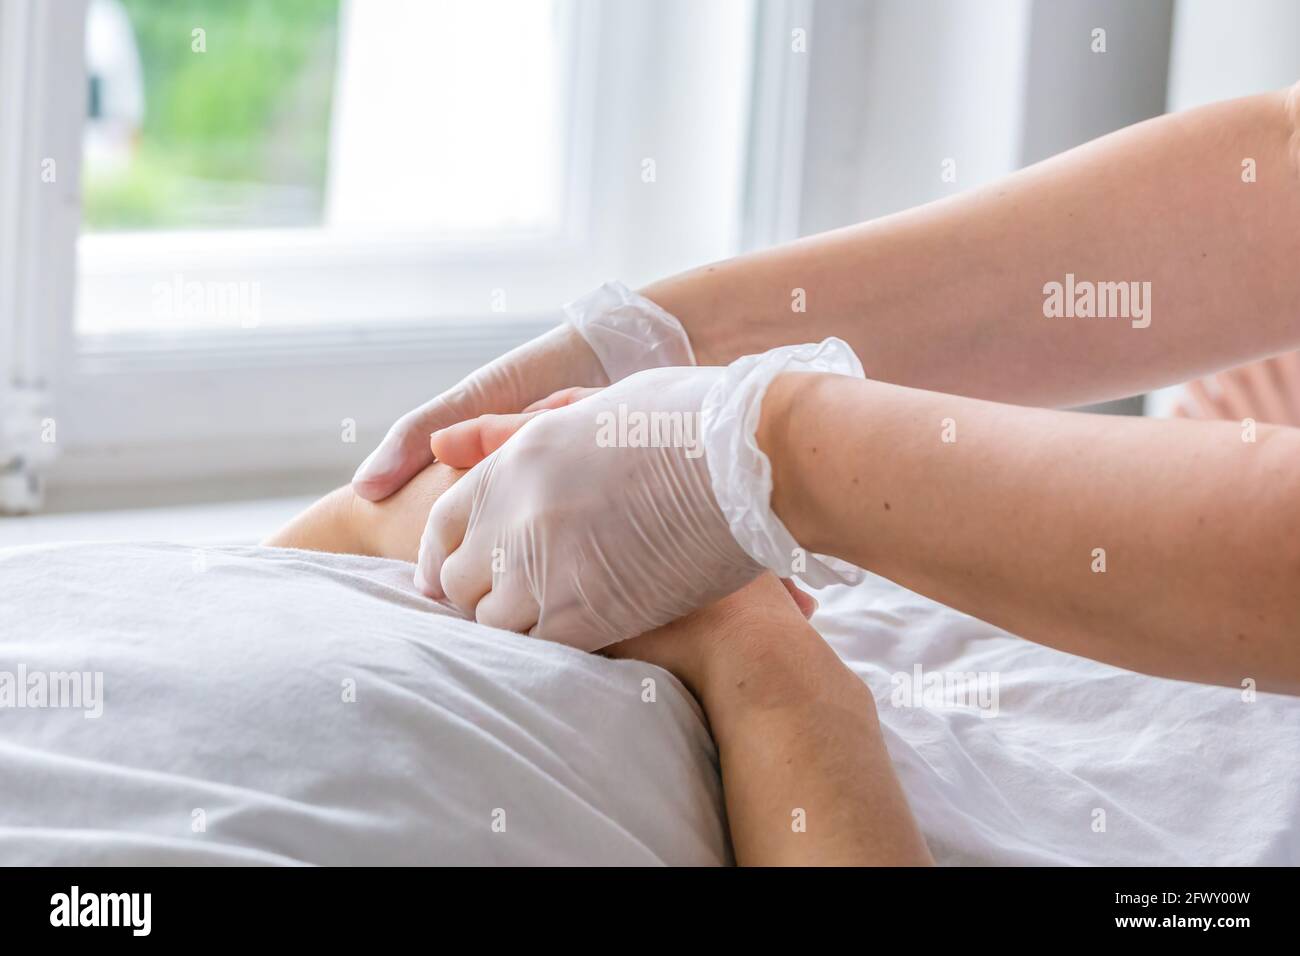 A nurse holding the hands of a sick person, patient Stock Photo